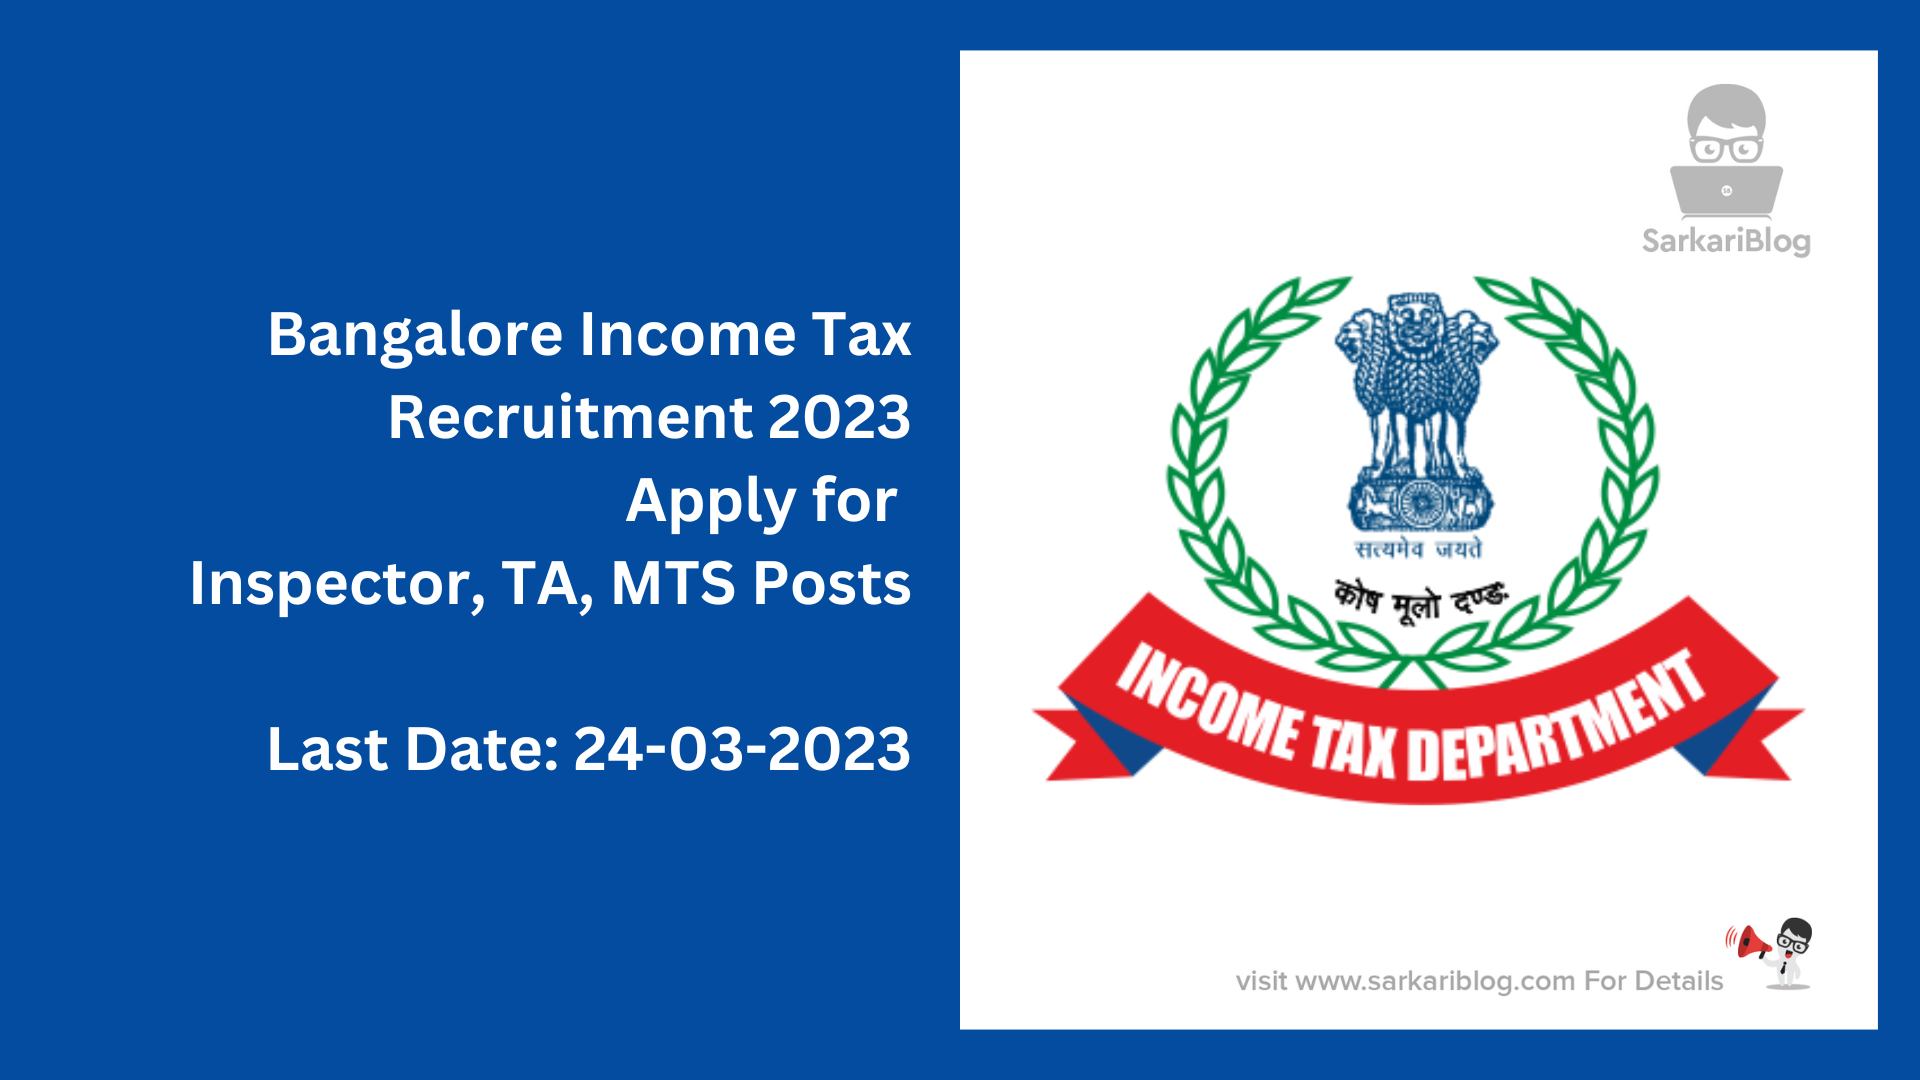 bangalore-income-tax-recruitment-2023-apply-for-inspector-ta-mts-posts